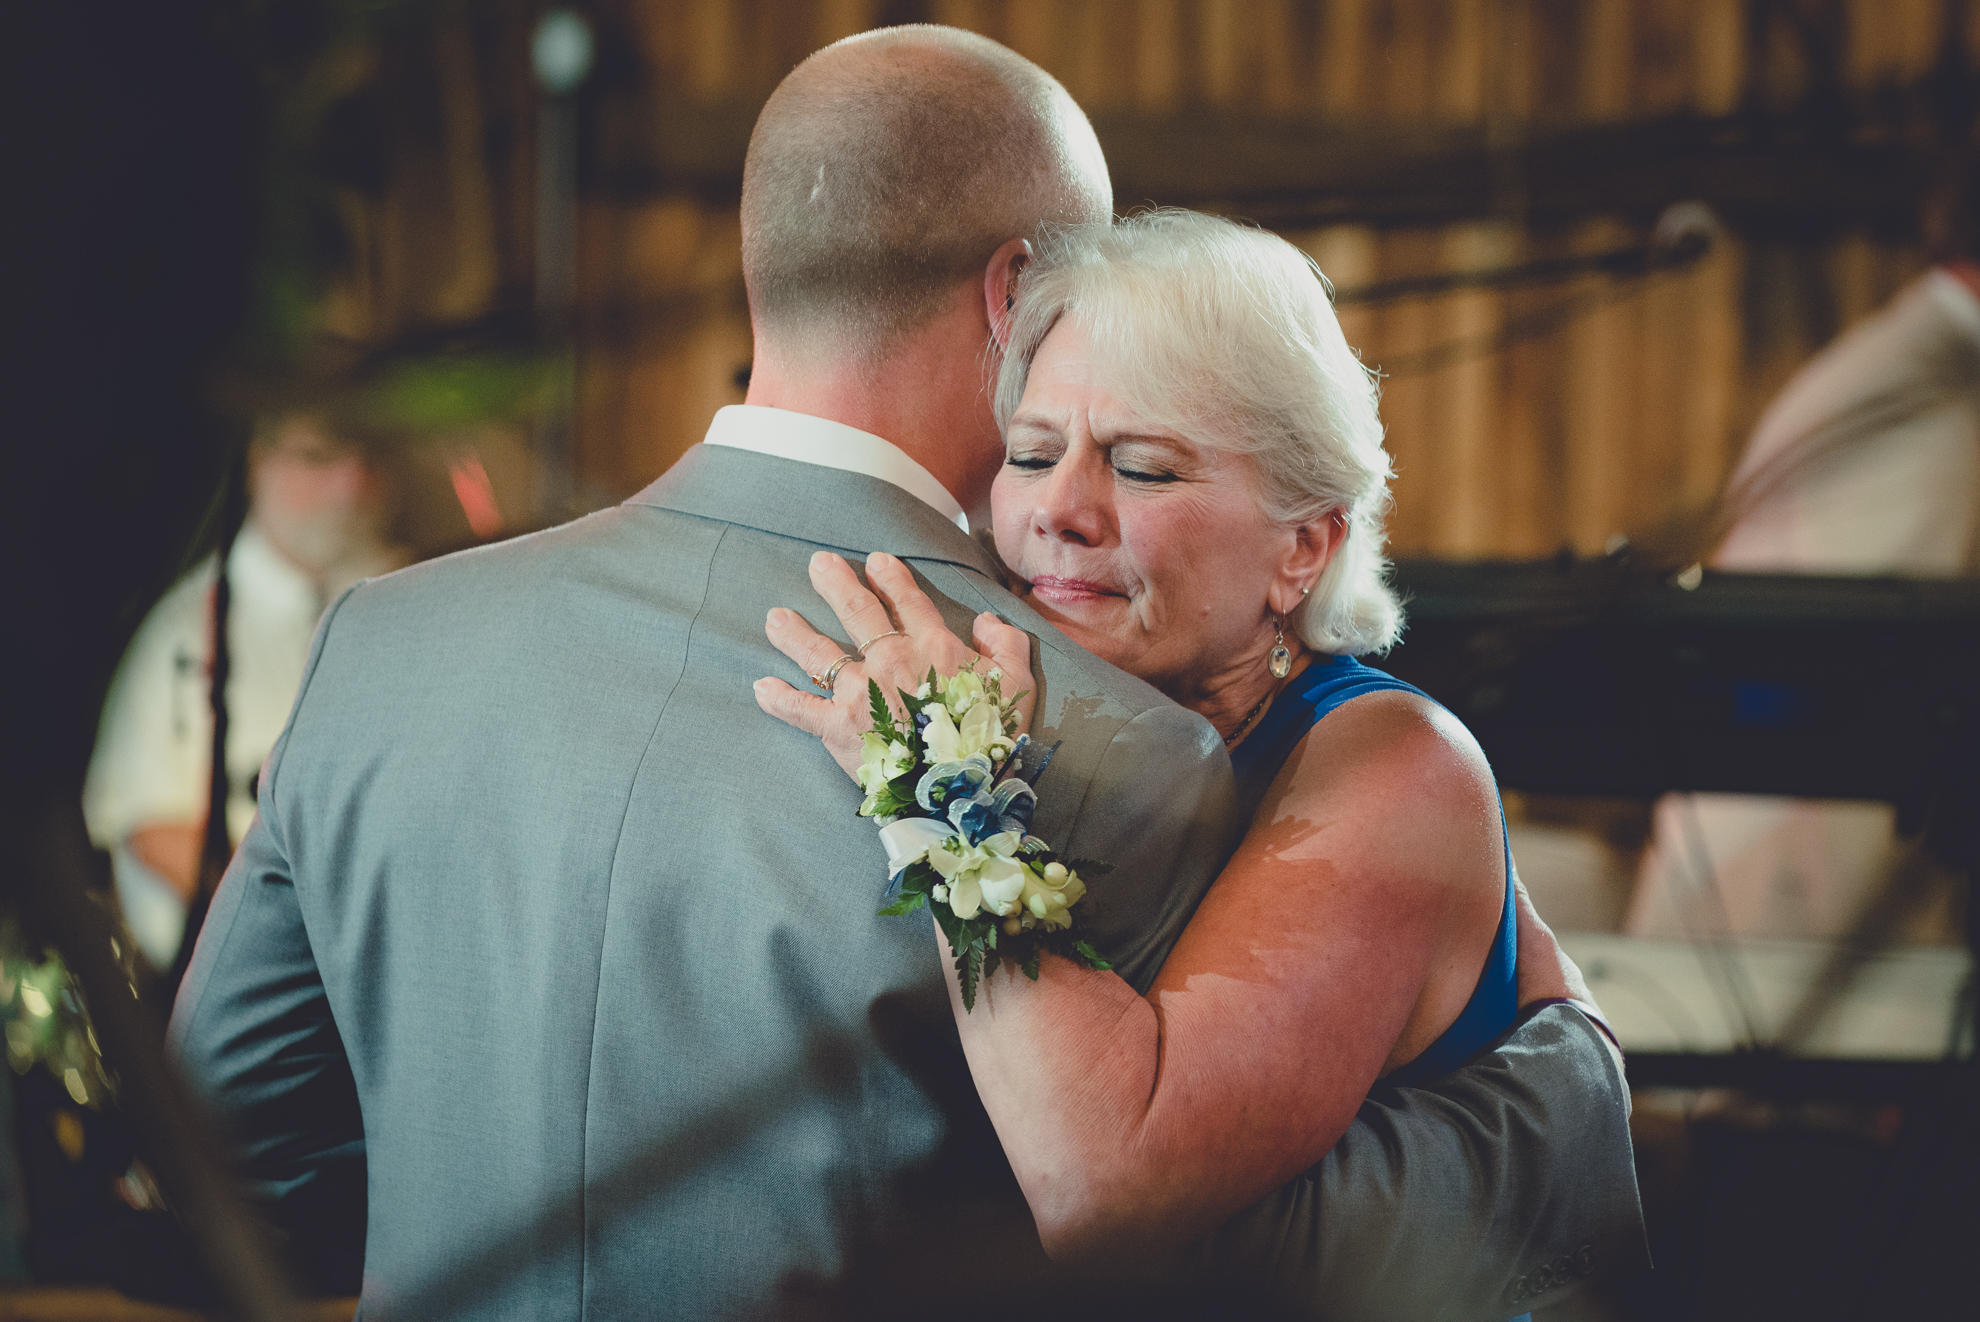 Mom cries while hugging groom during first dance at wedding reception at Hayloft in the Grove in Buffalo, NY